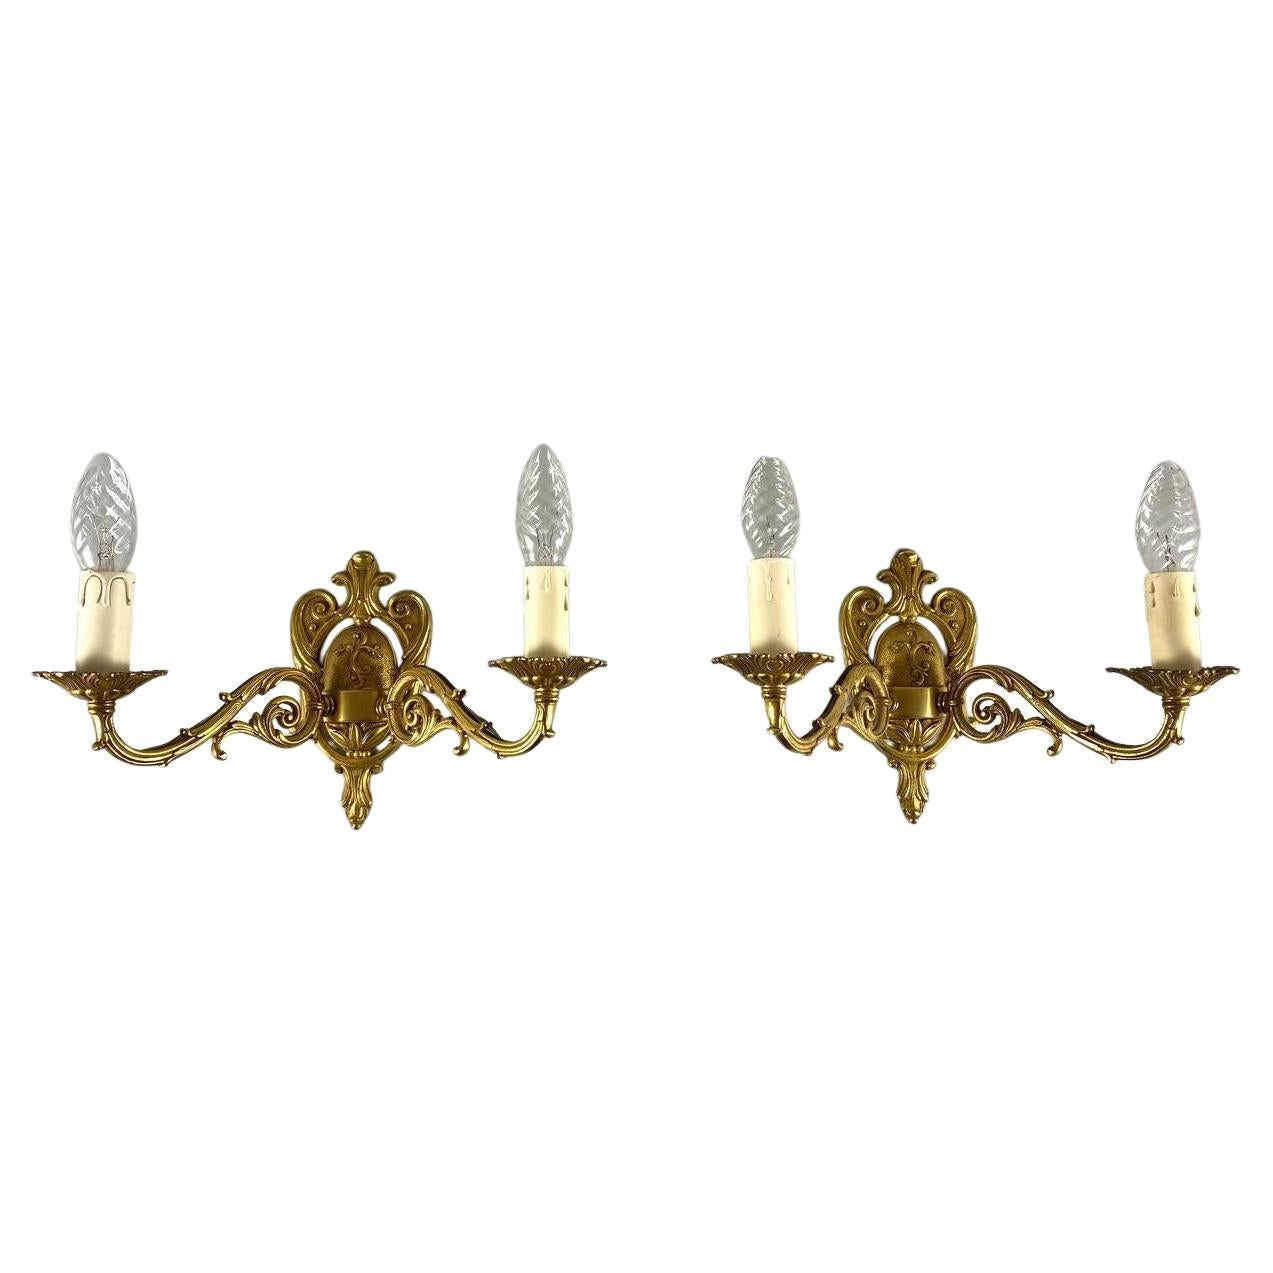 Paired vintage wall sconces in gilt brass, artistic casting.

Floral motif with classic swirl.

Each sconce consists of a base and two curved arms emanating from it, skillfully finished with chasing by hand.

The horns of the sconces are